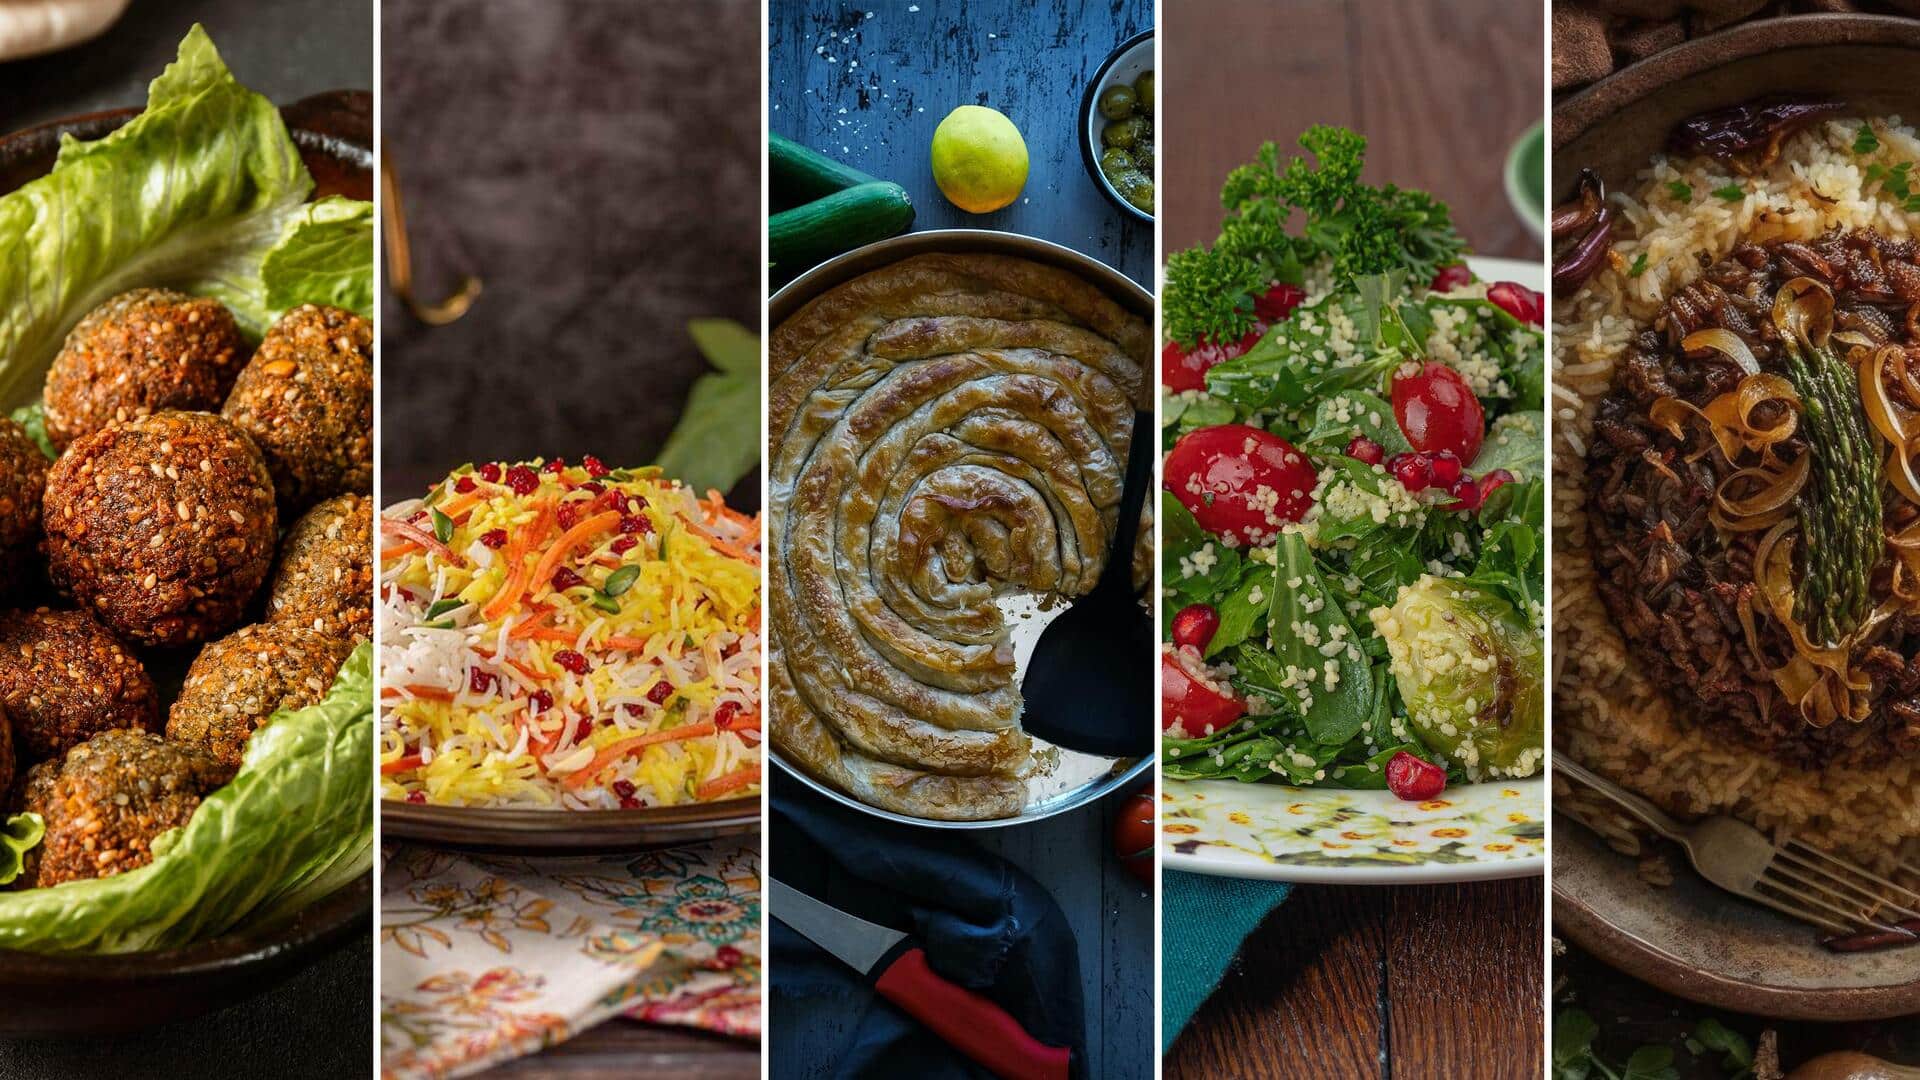 A guide to what vegetarians can eat in UAE